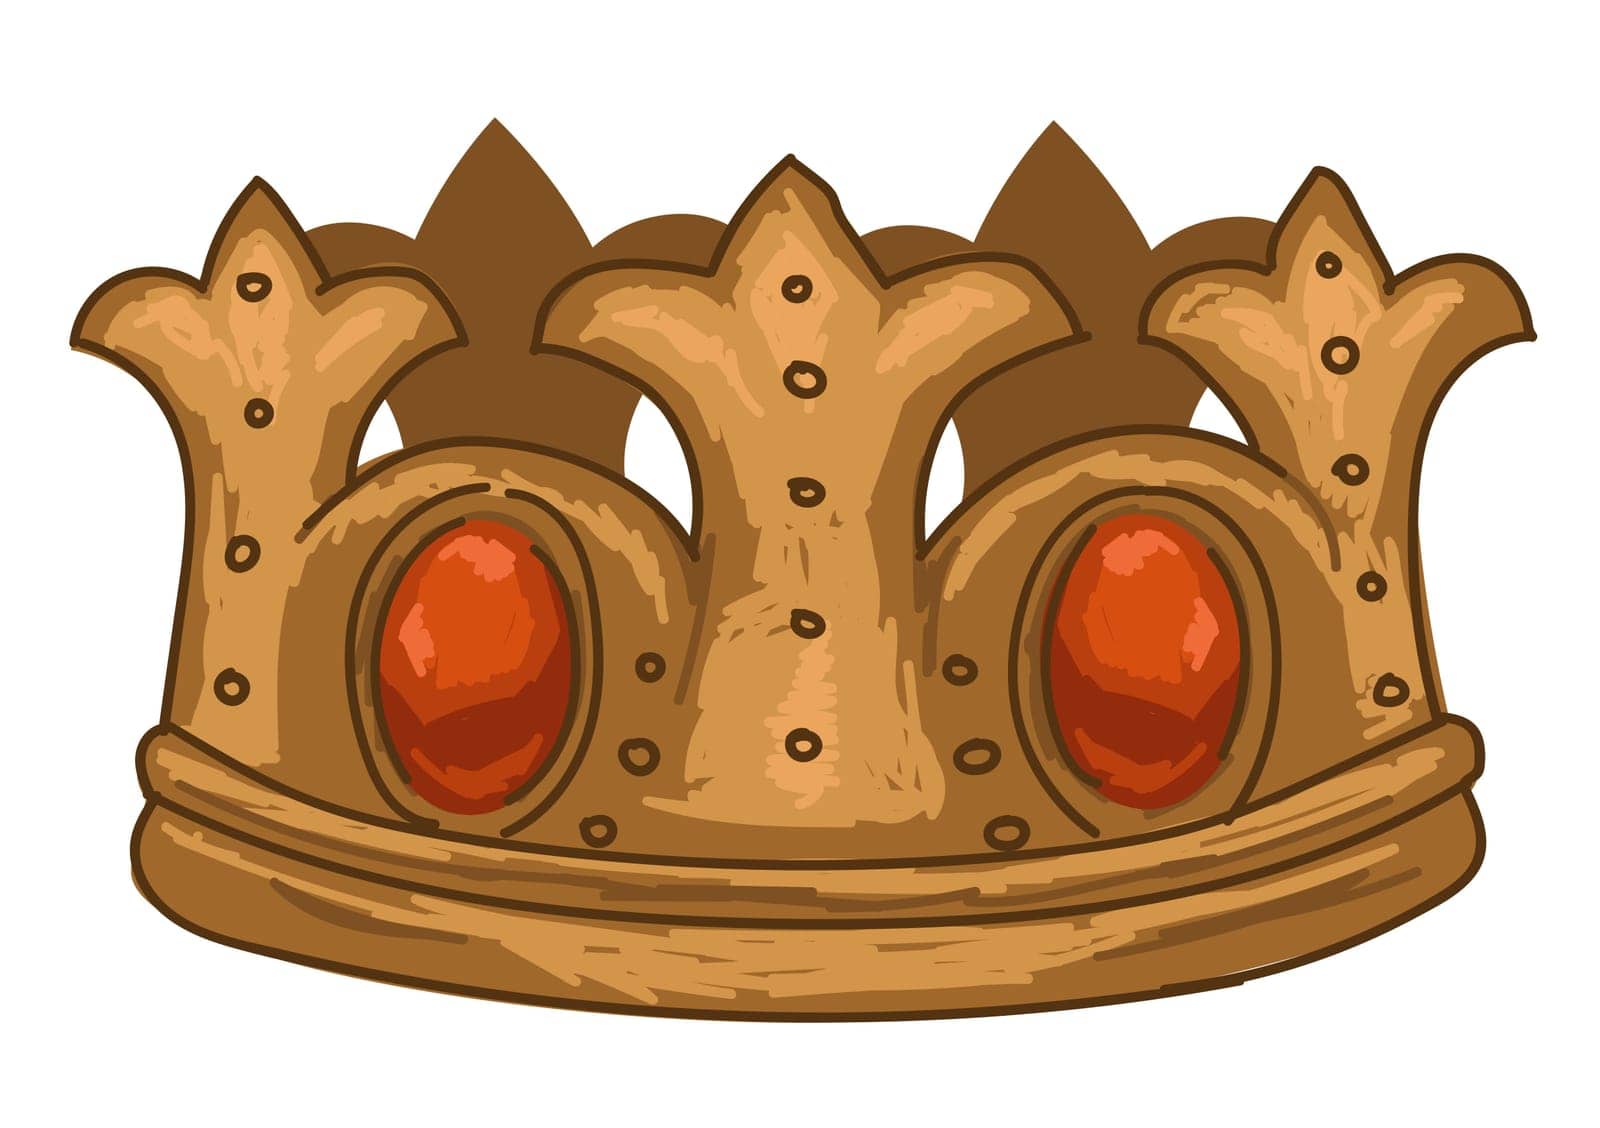 Crown with precious stones and gems, jewelry for kings and queens, price and princesses. Symbol of royalty and monarch power. Elegant and classic design, antiquity exponent. Vector in flat style